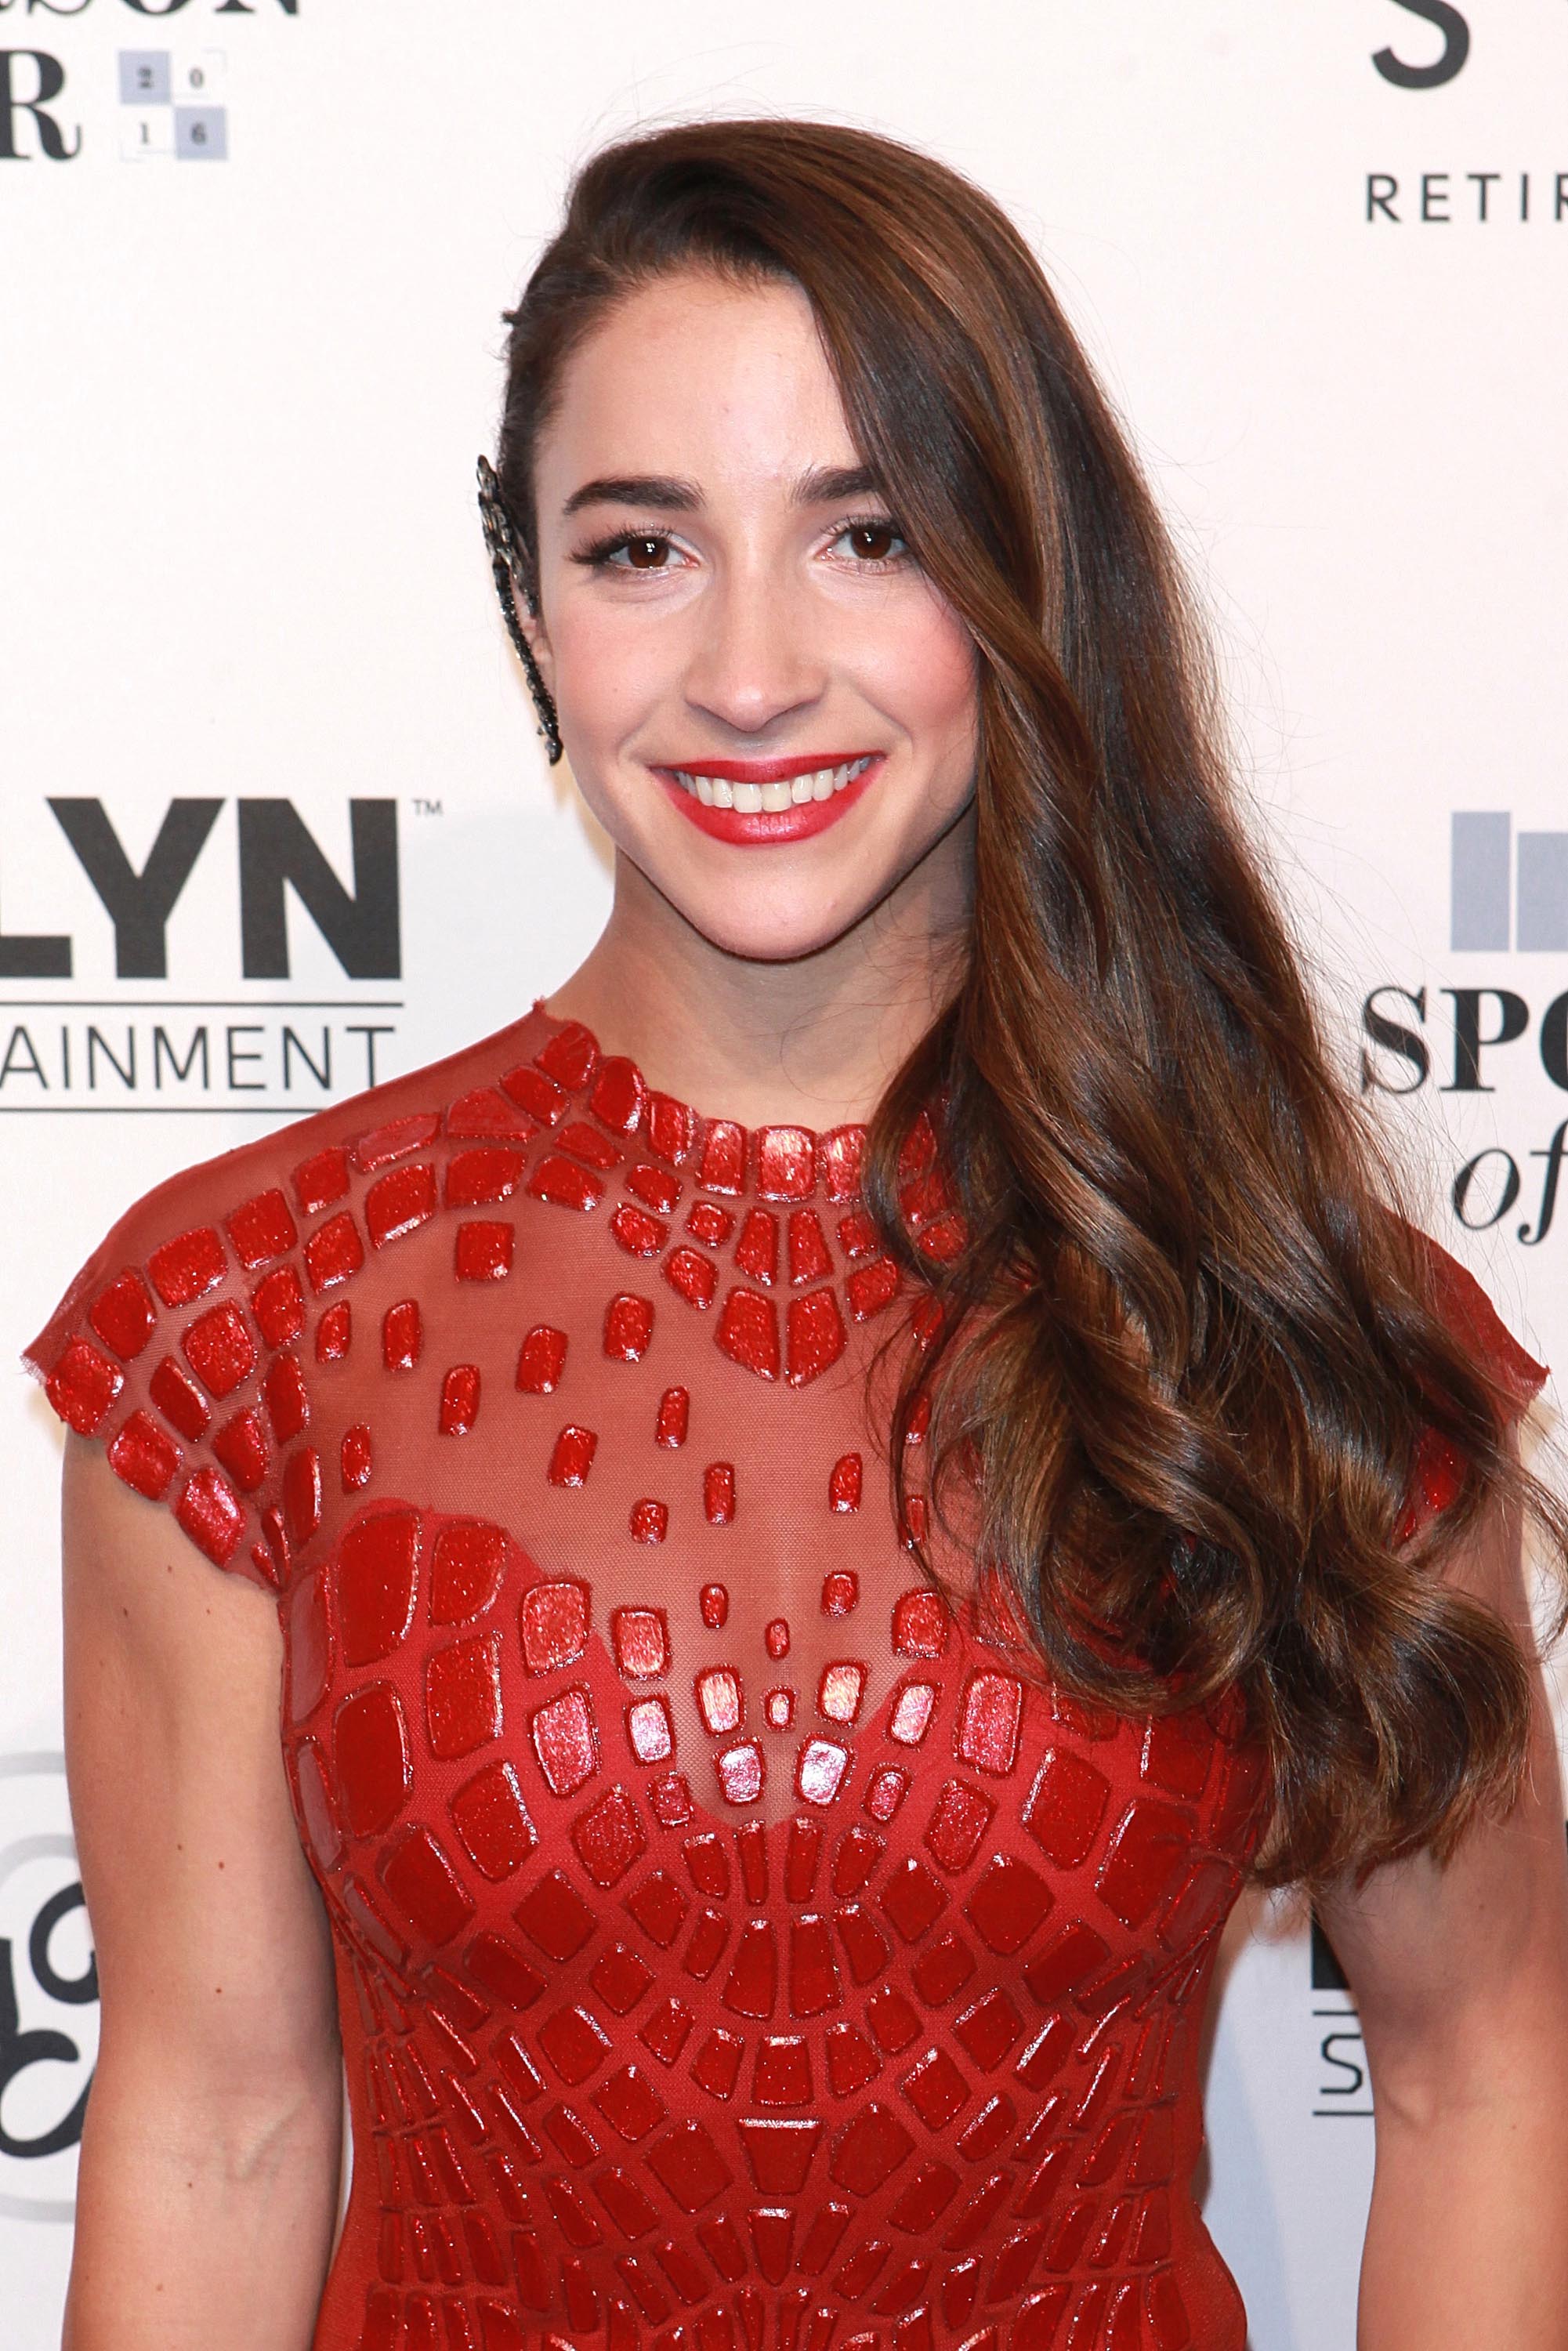 Aly Raisman attends Sports Illustrated Sportsperson of the Year 2016